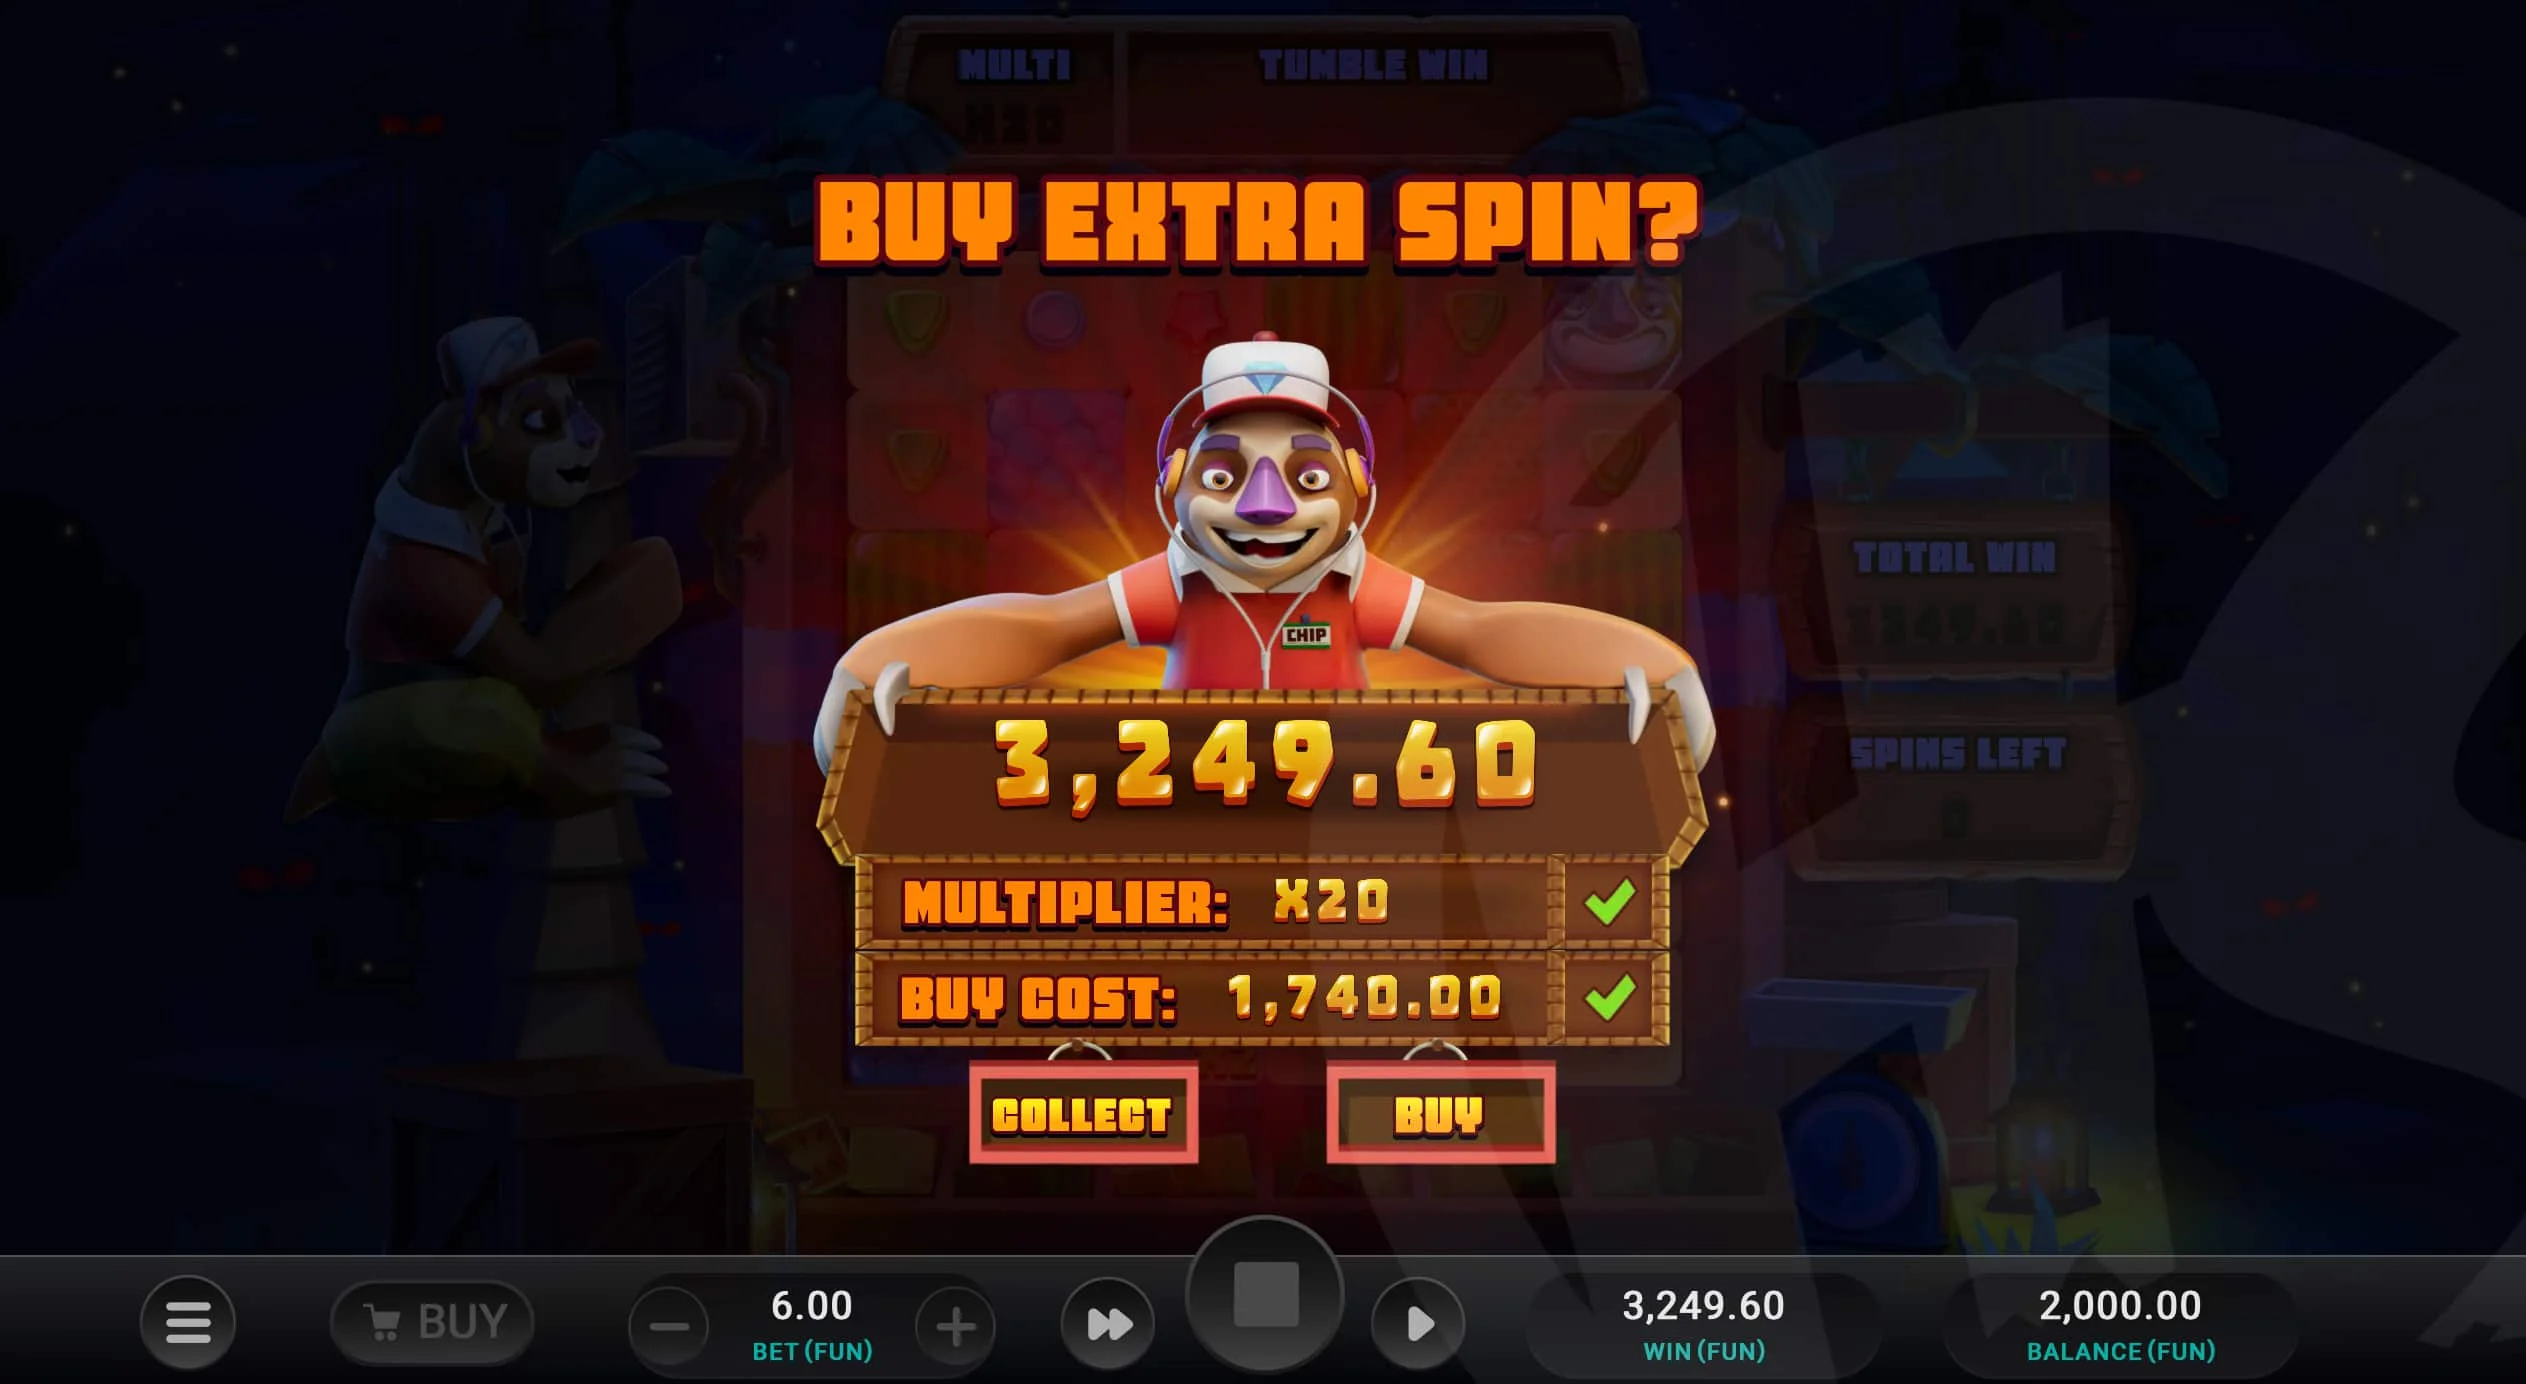 Players Can Buy an Extra Free Spin after Super Free Spins, Keeping Their Progressive Multiplier in Play